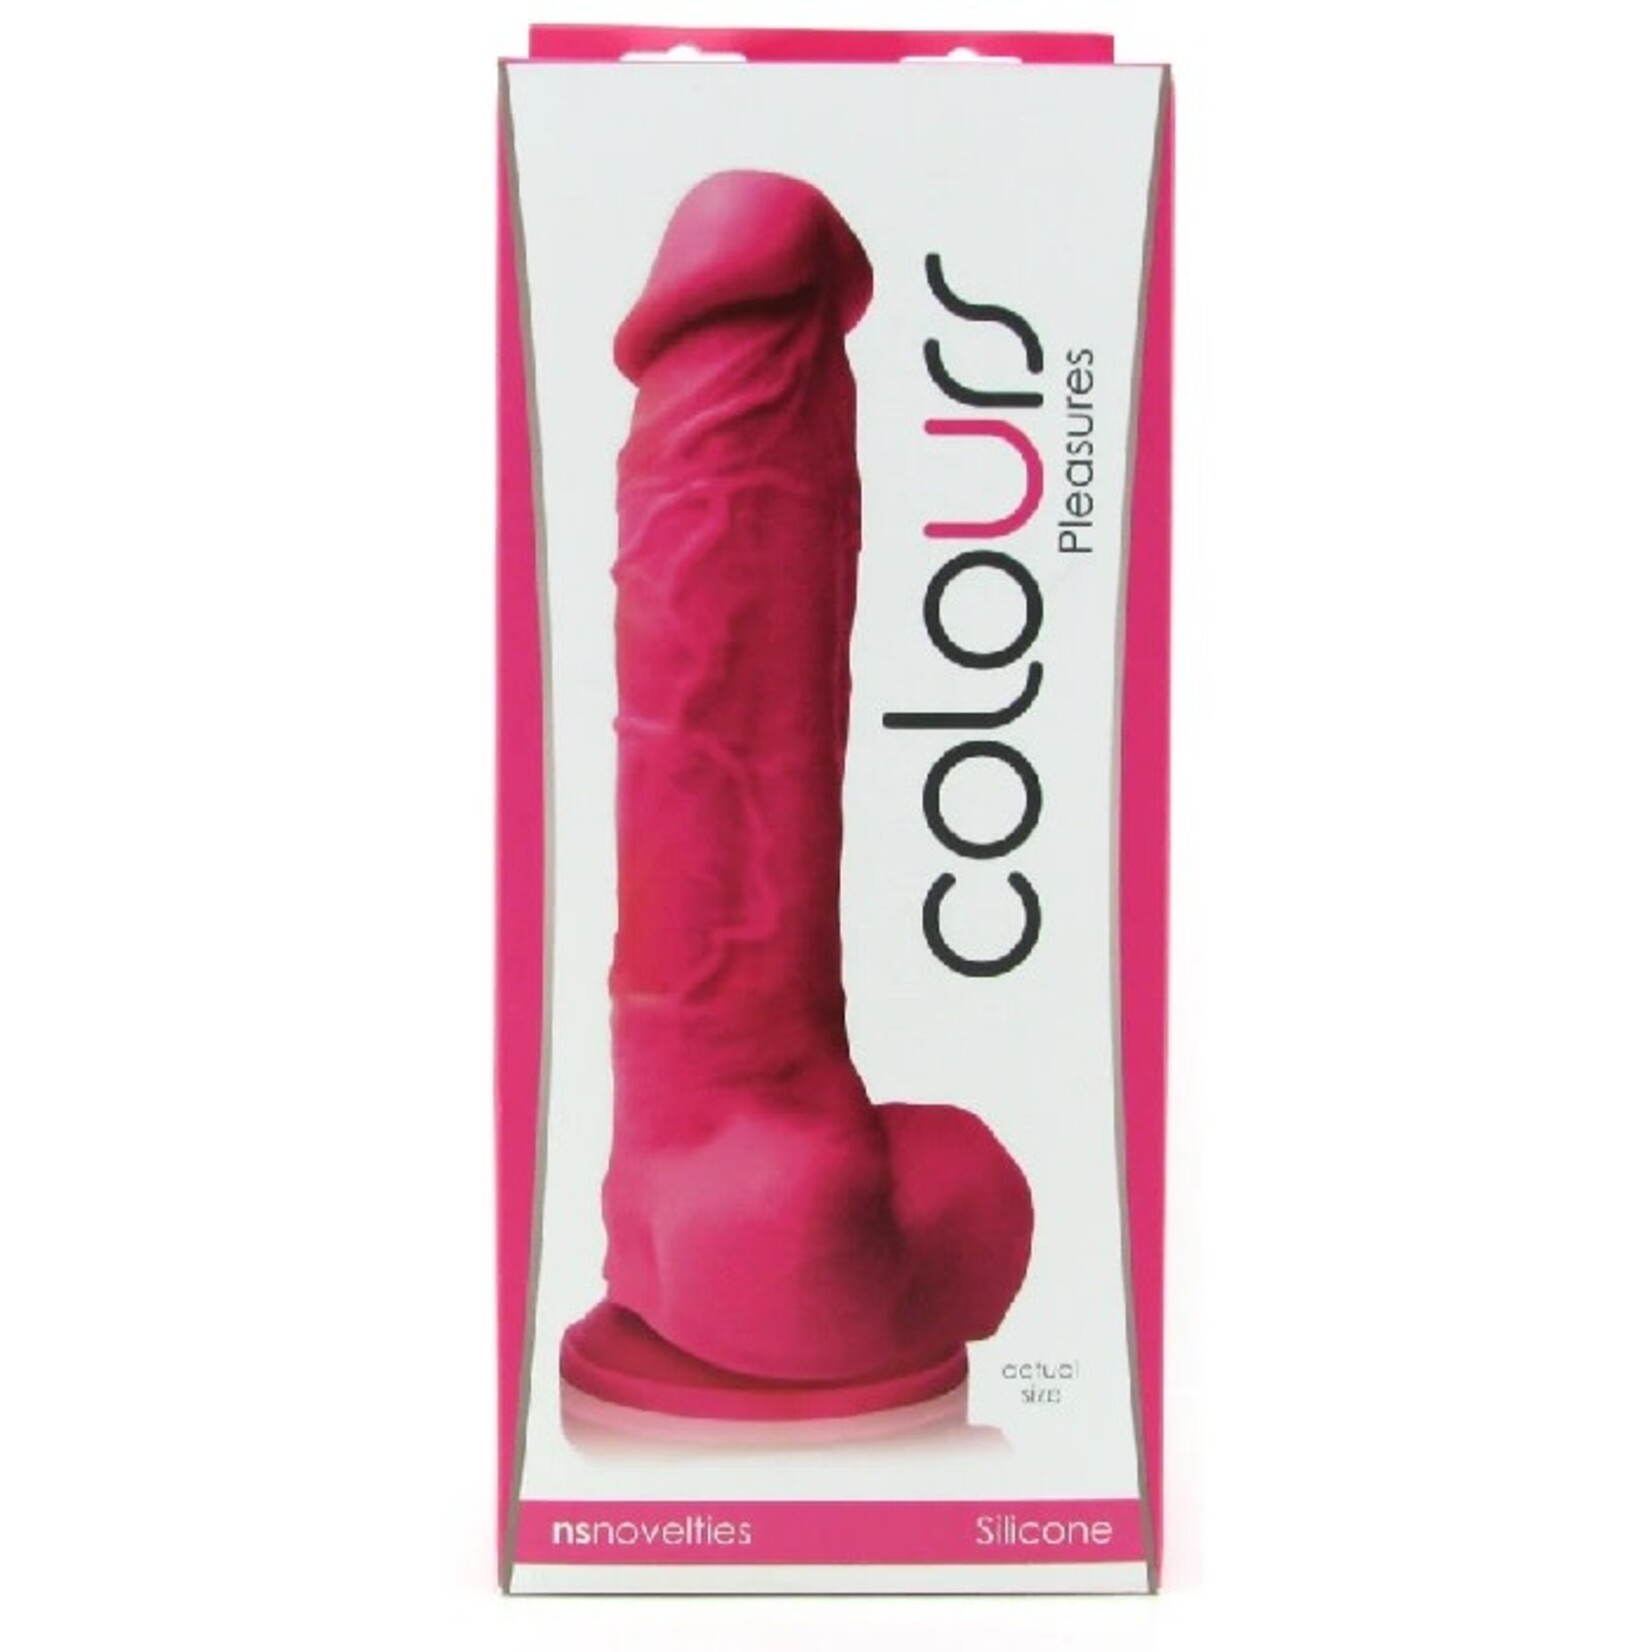 NSNOVELTIES LARGE SILICONE COLOURS DILDO IN PINK